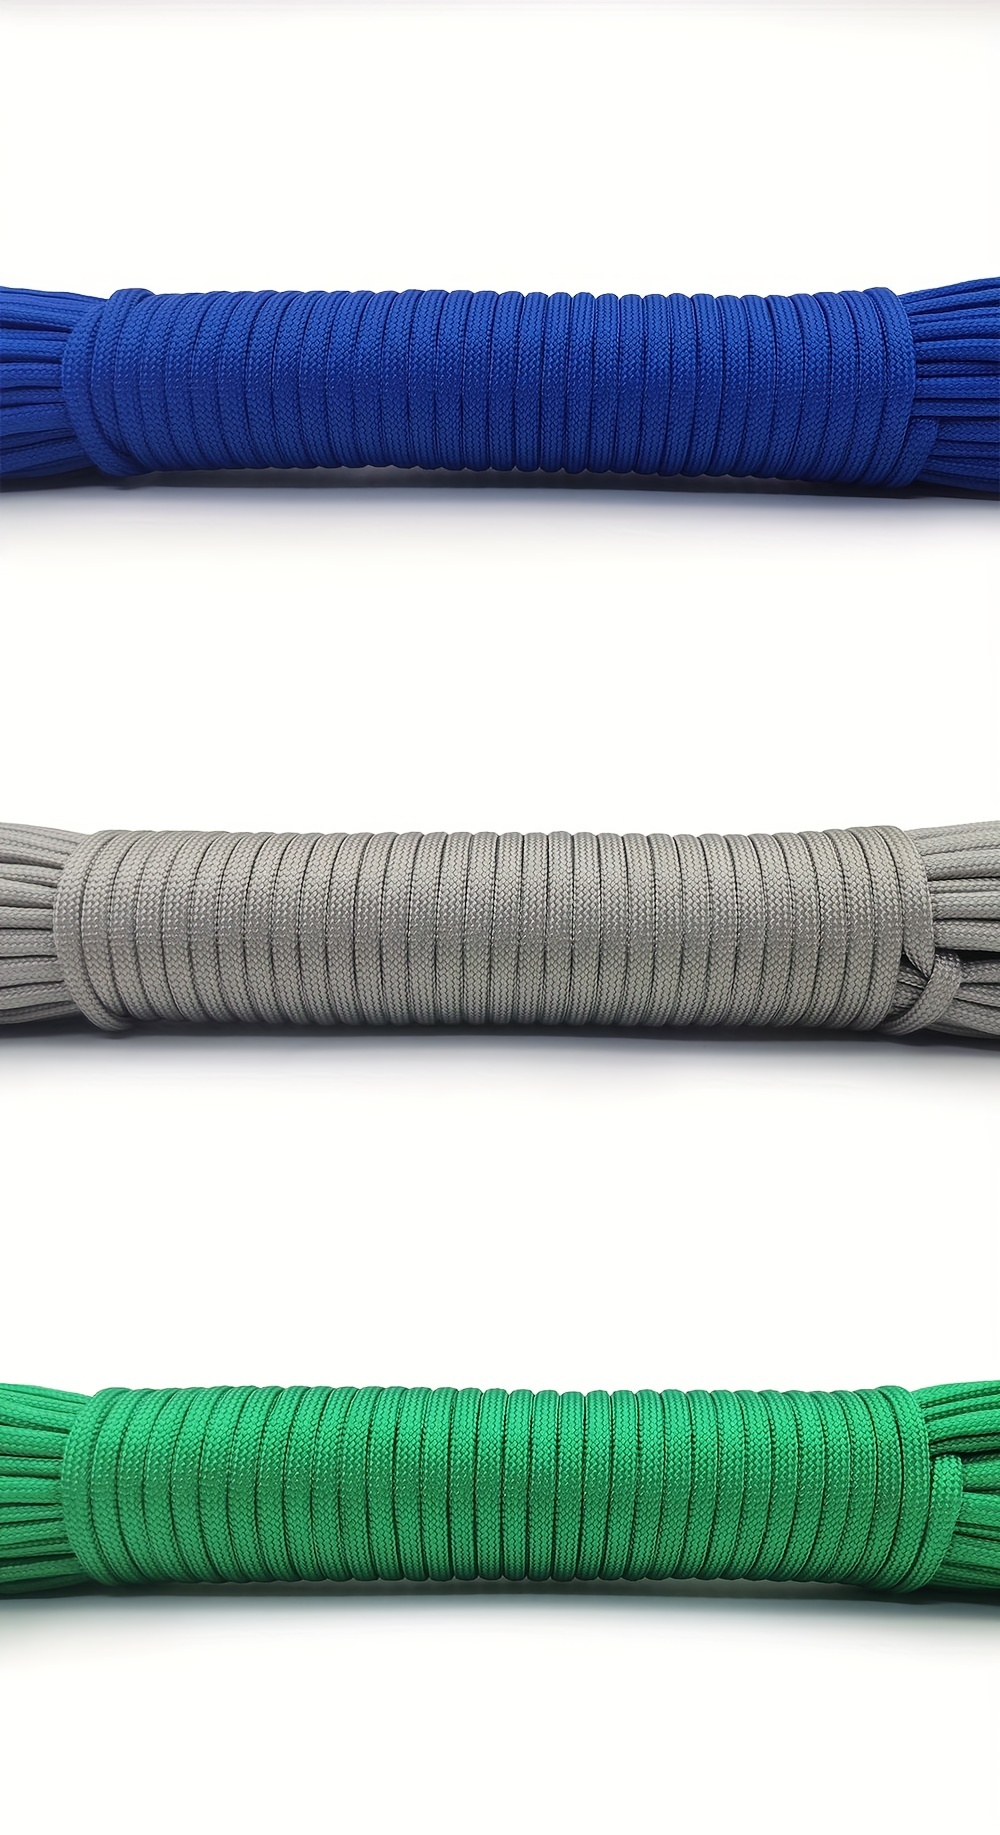 16 4ft 5m 9 Core Rope 4mm Diameter High Strength Rope For Outdoor Emergency  Survival Camping, Shop The Latest Trends